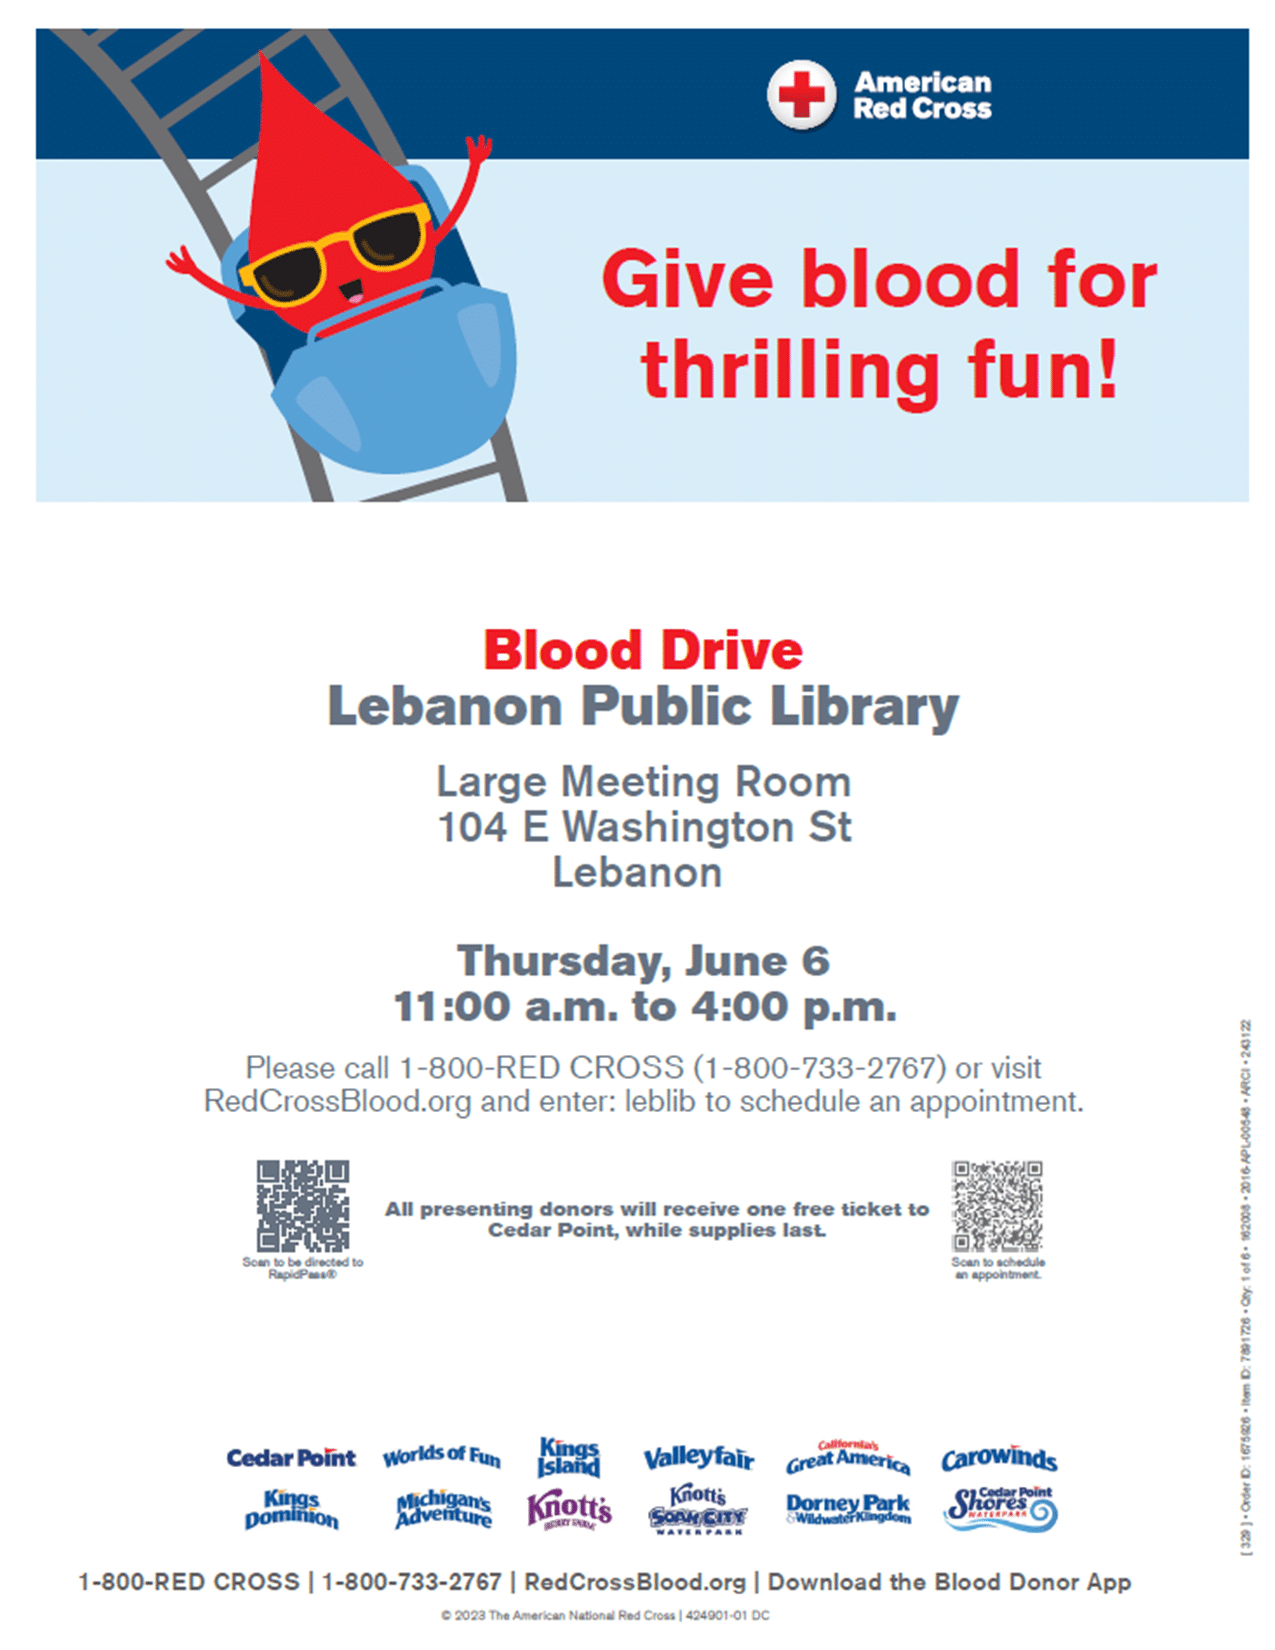 Cartoon blood droplet riding a rollercoaster with the following text: Give blood for thrilling fun! Blood Drive at the Lebanon Public Library in the Large Meeting Room. Thursday, June 6th, 11am to 4pm. Please call 1-800-RED CROSS (1-800-733-2767) or visit RedCrossBlood.org and enter: leblib to schedule an appointment. All presenting donors will receive one free ticket to Cedar Point, while supplies last.